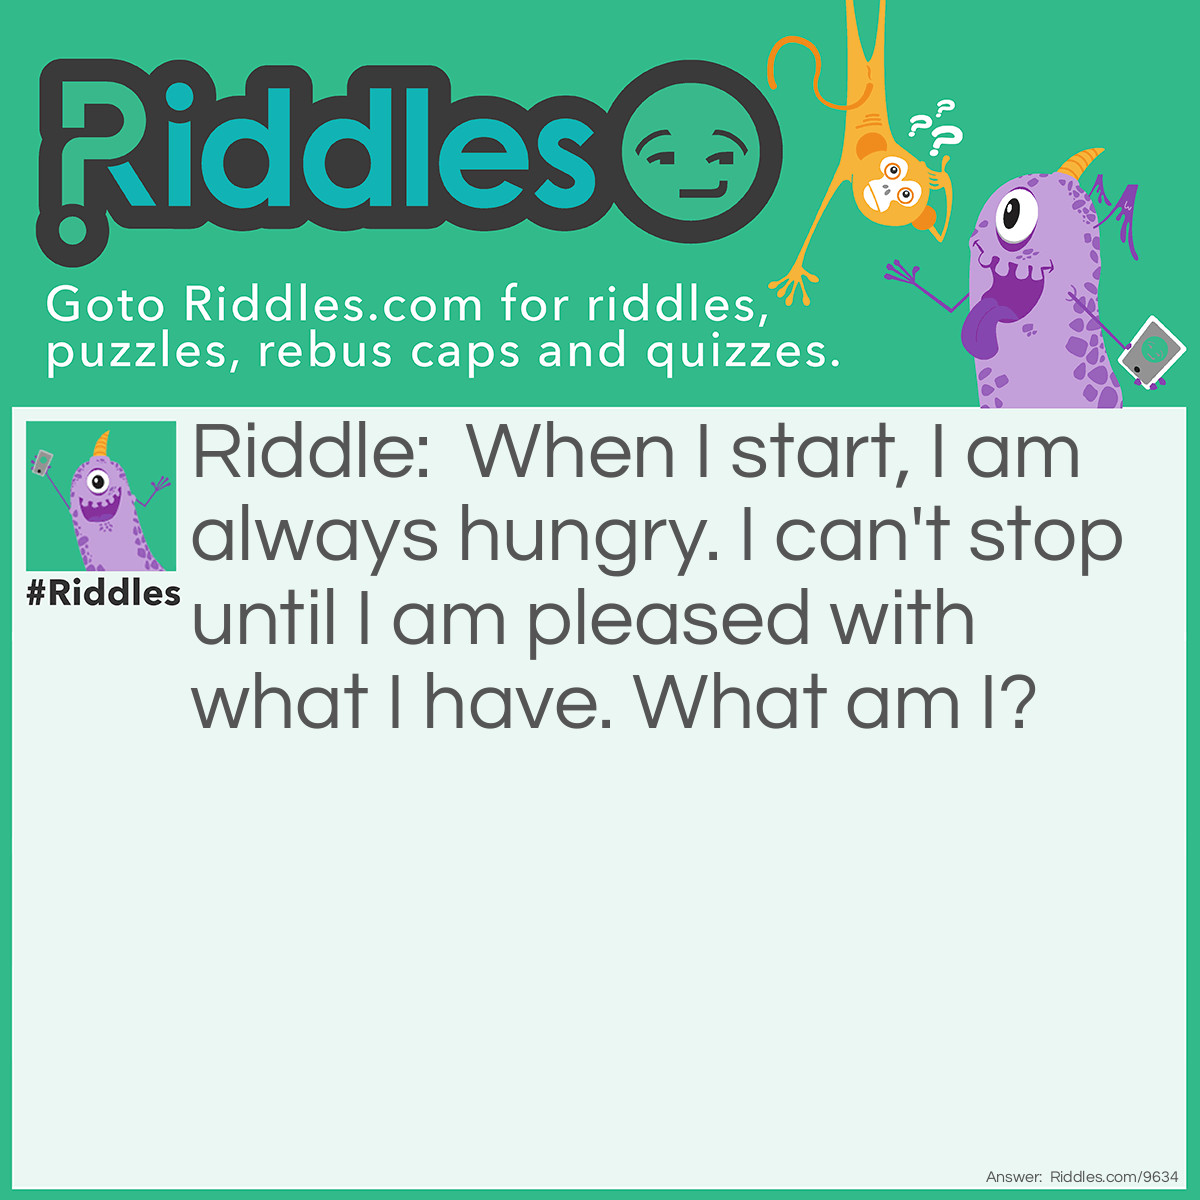 Riddle: When I start, I am always hungry. I can't stop until I am pleased with what I have. What am I? Answer: Greed.